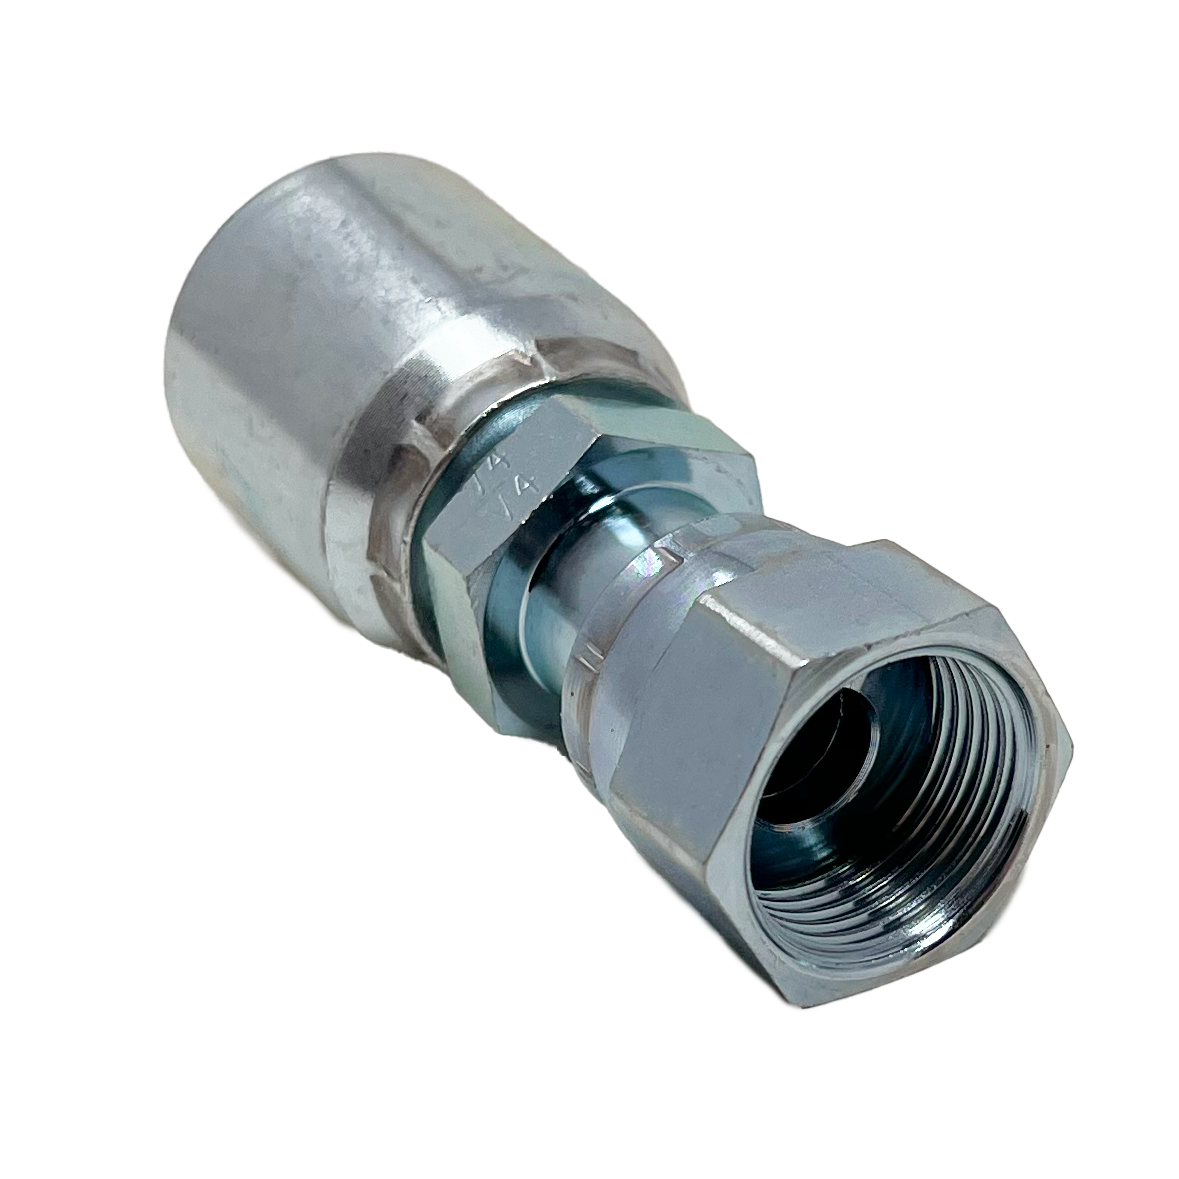 B2-OFFX-0808: Continental Hose Fitting, 0.5 (1/2") Hose ID x 13/16-16 Female ORFS, Straight Swivel Connection